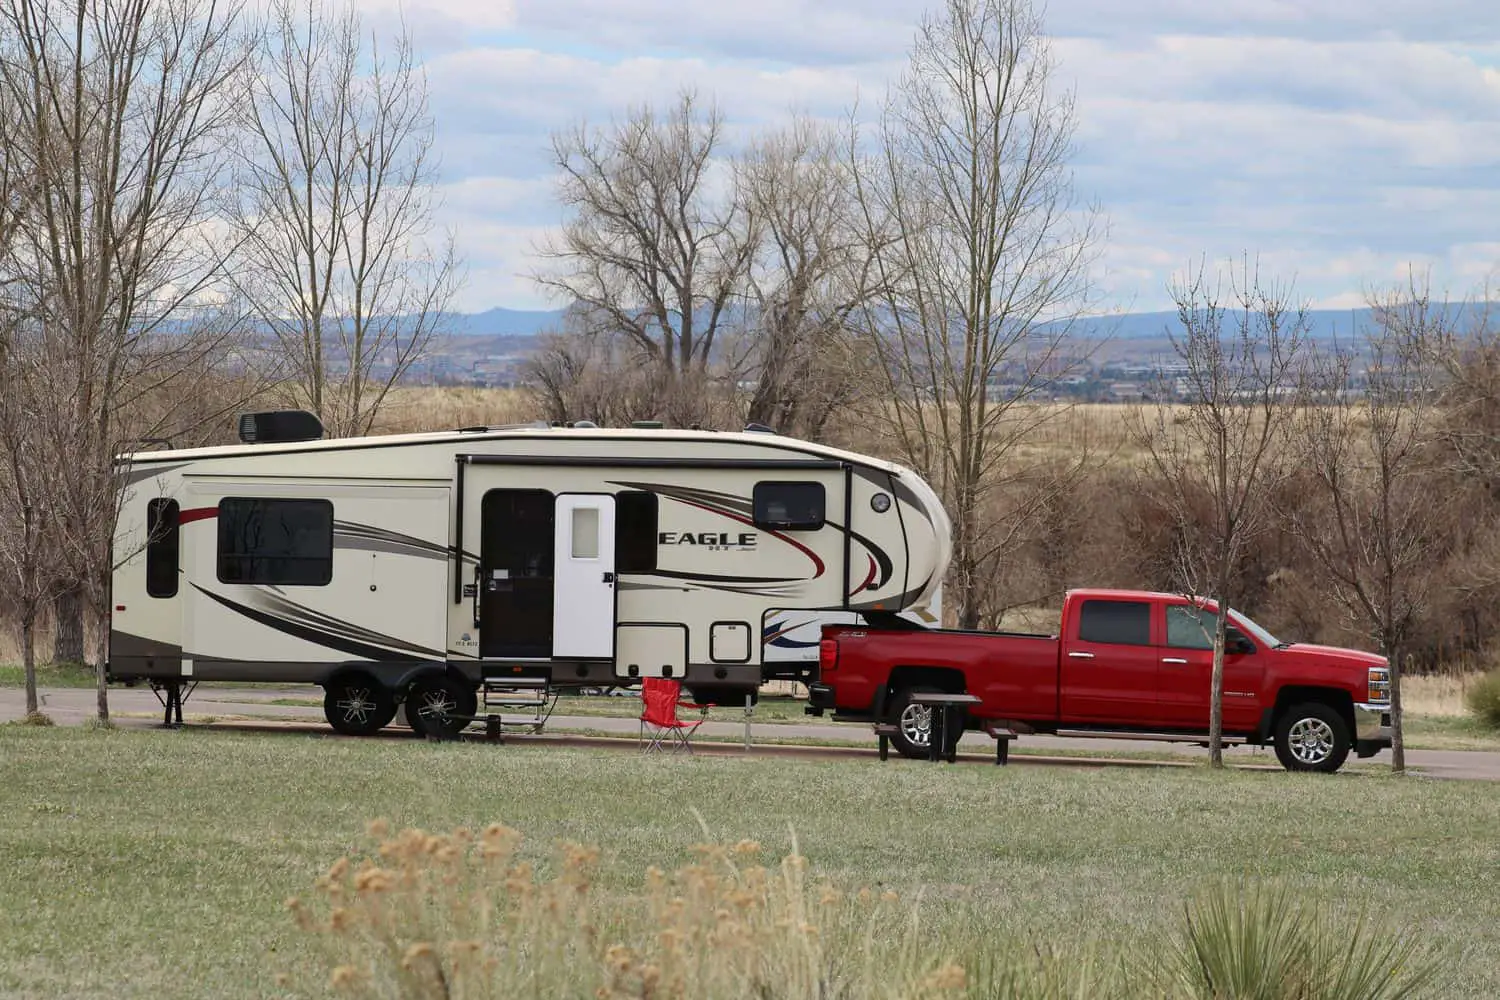 How to convert a fifth wheel camper to a bumper pull?